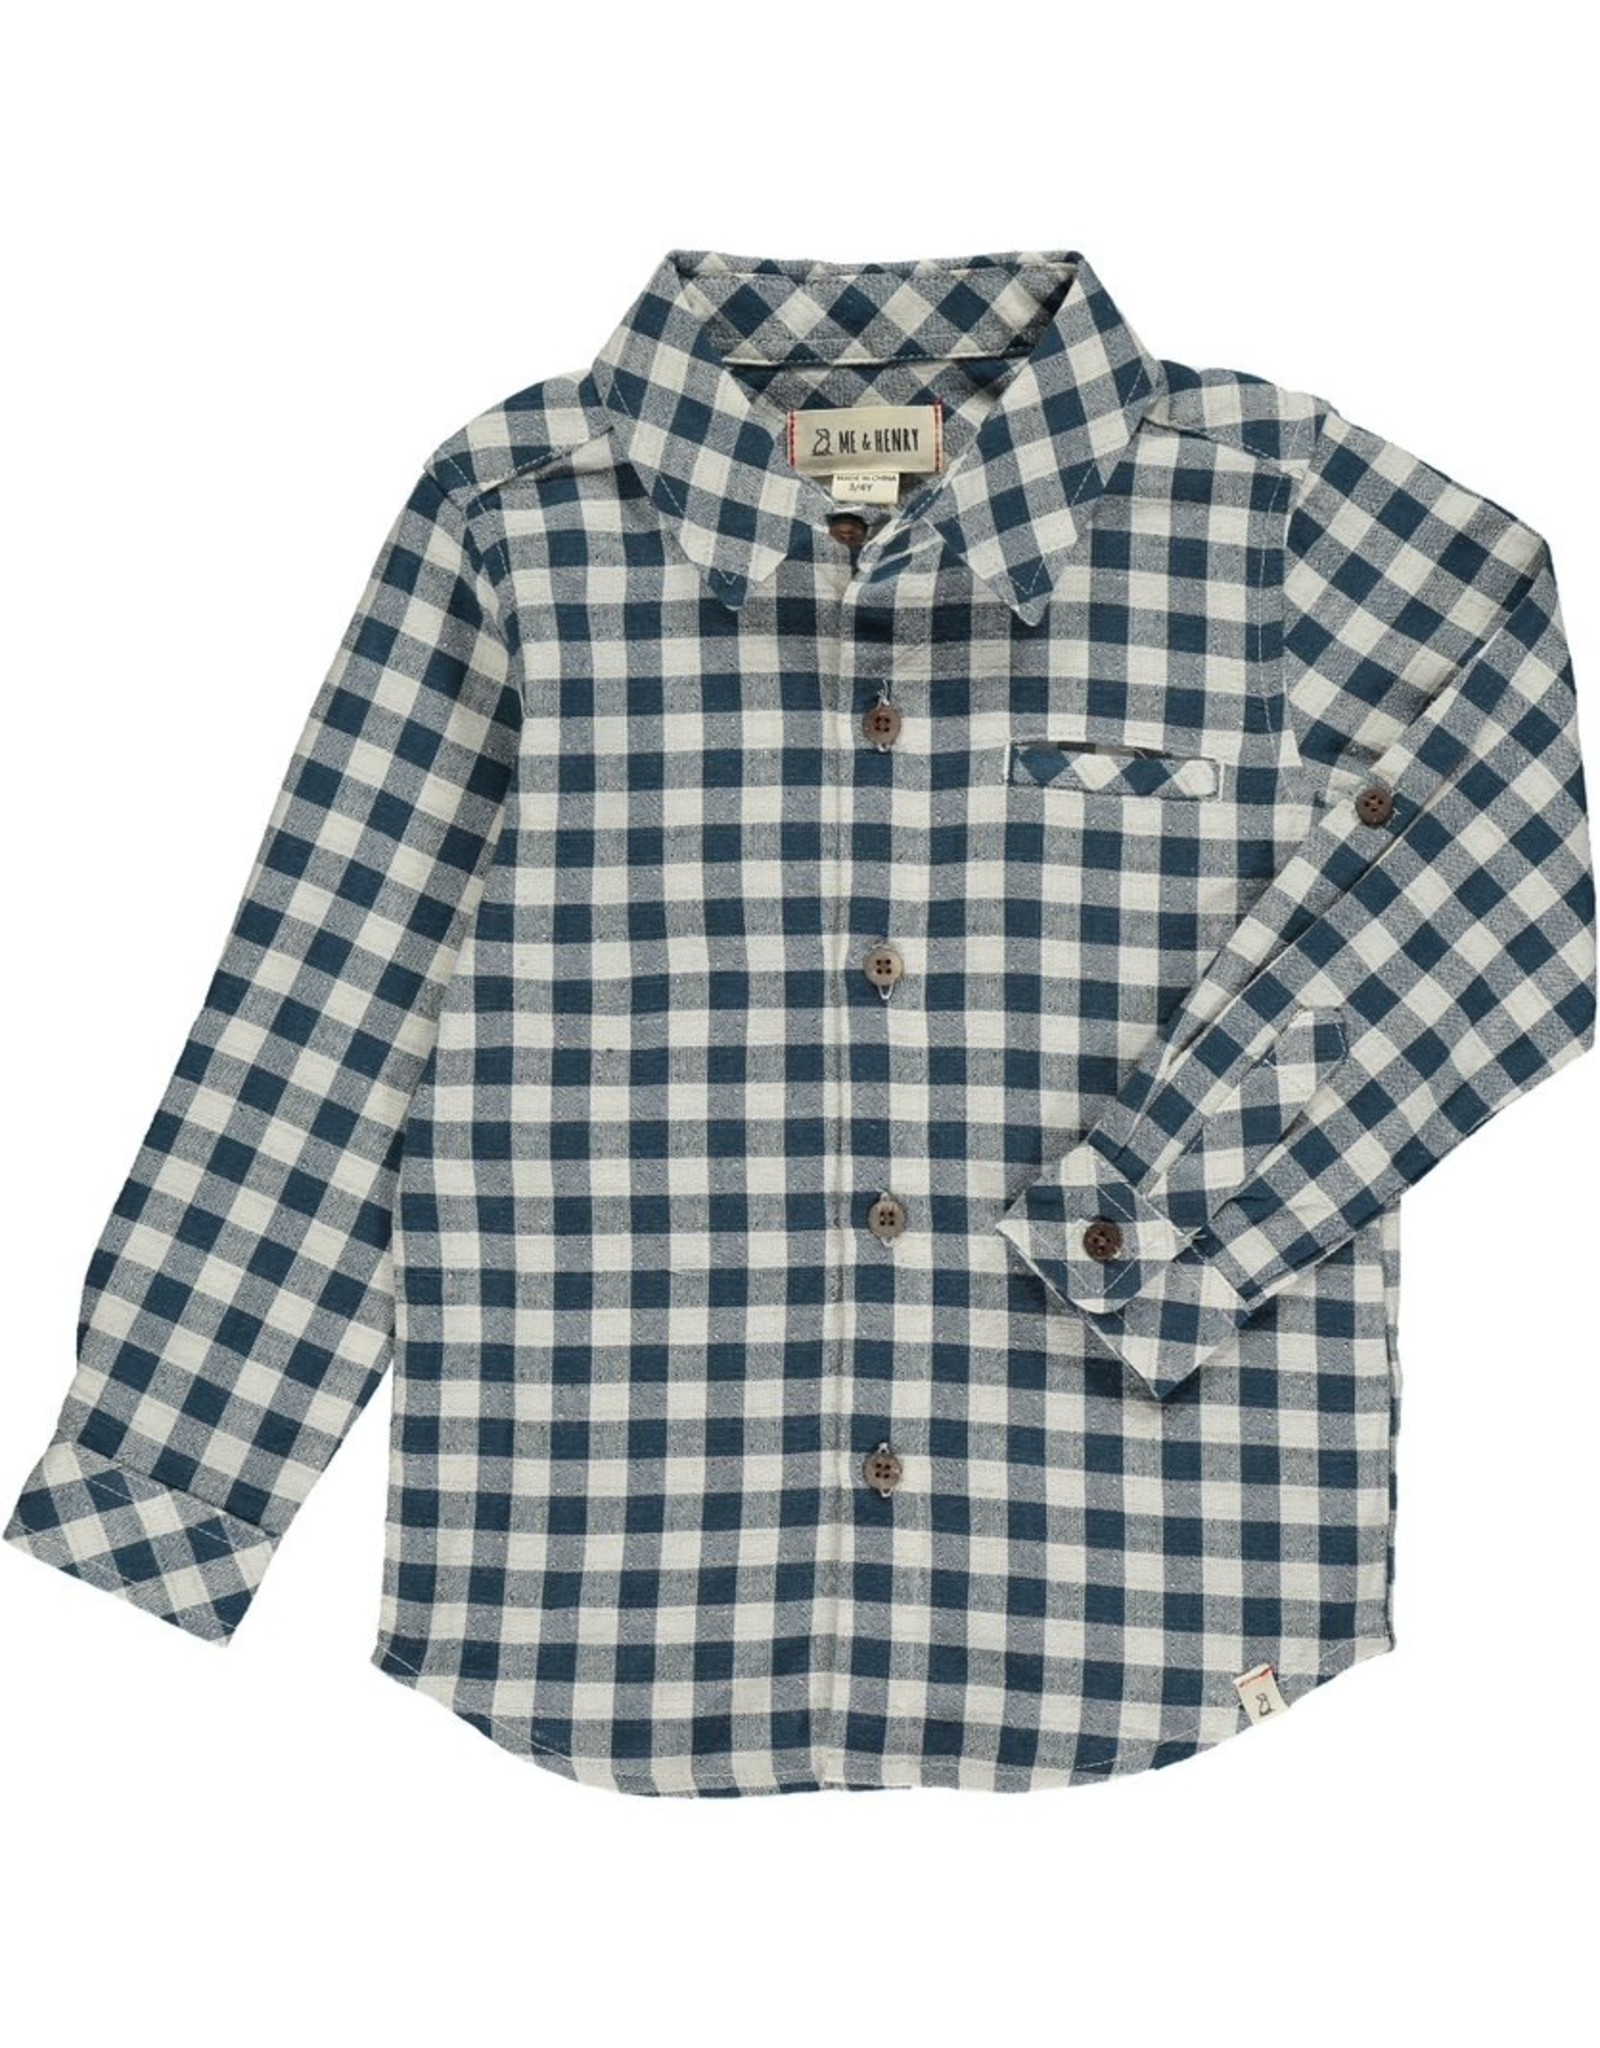 Me & Henry Atwood Woven Shirt - Teal/White Plaid